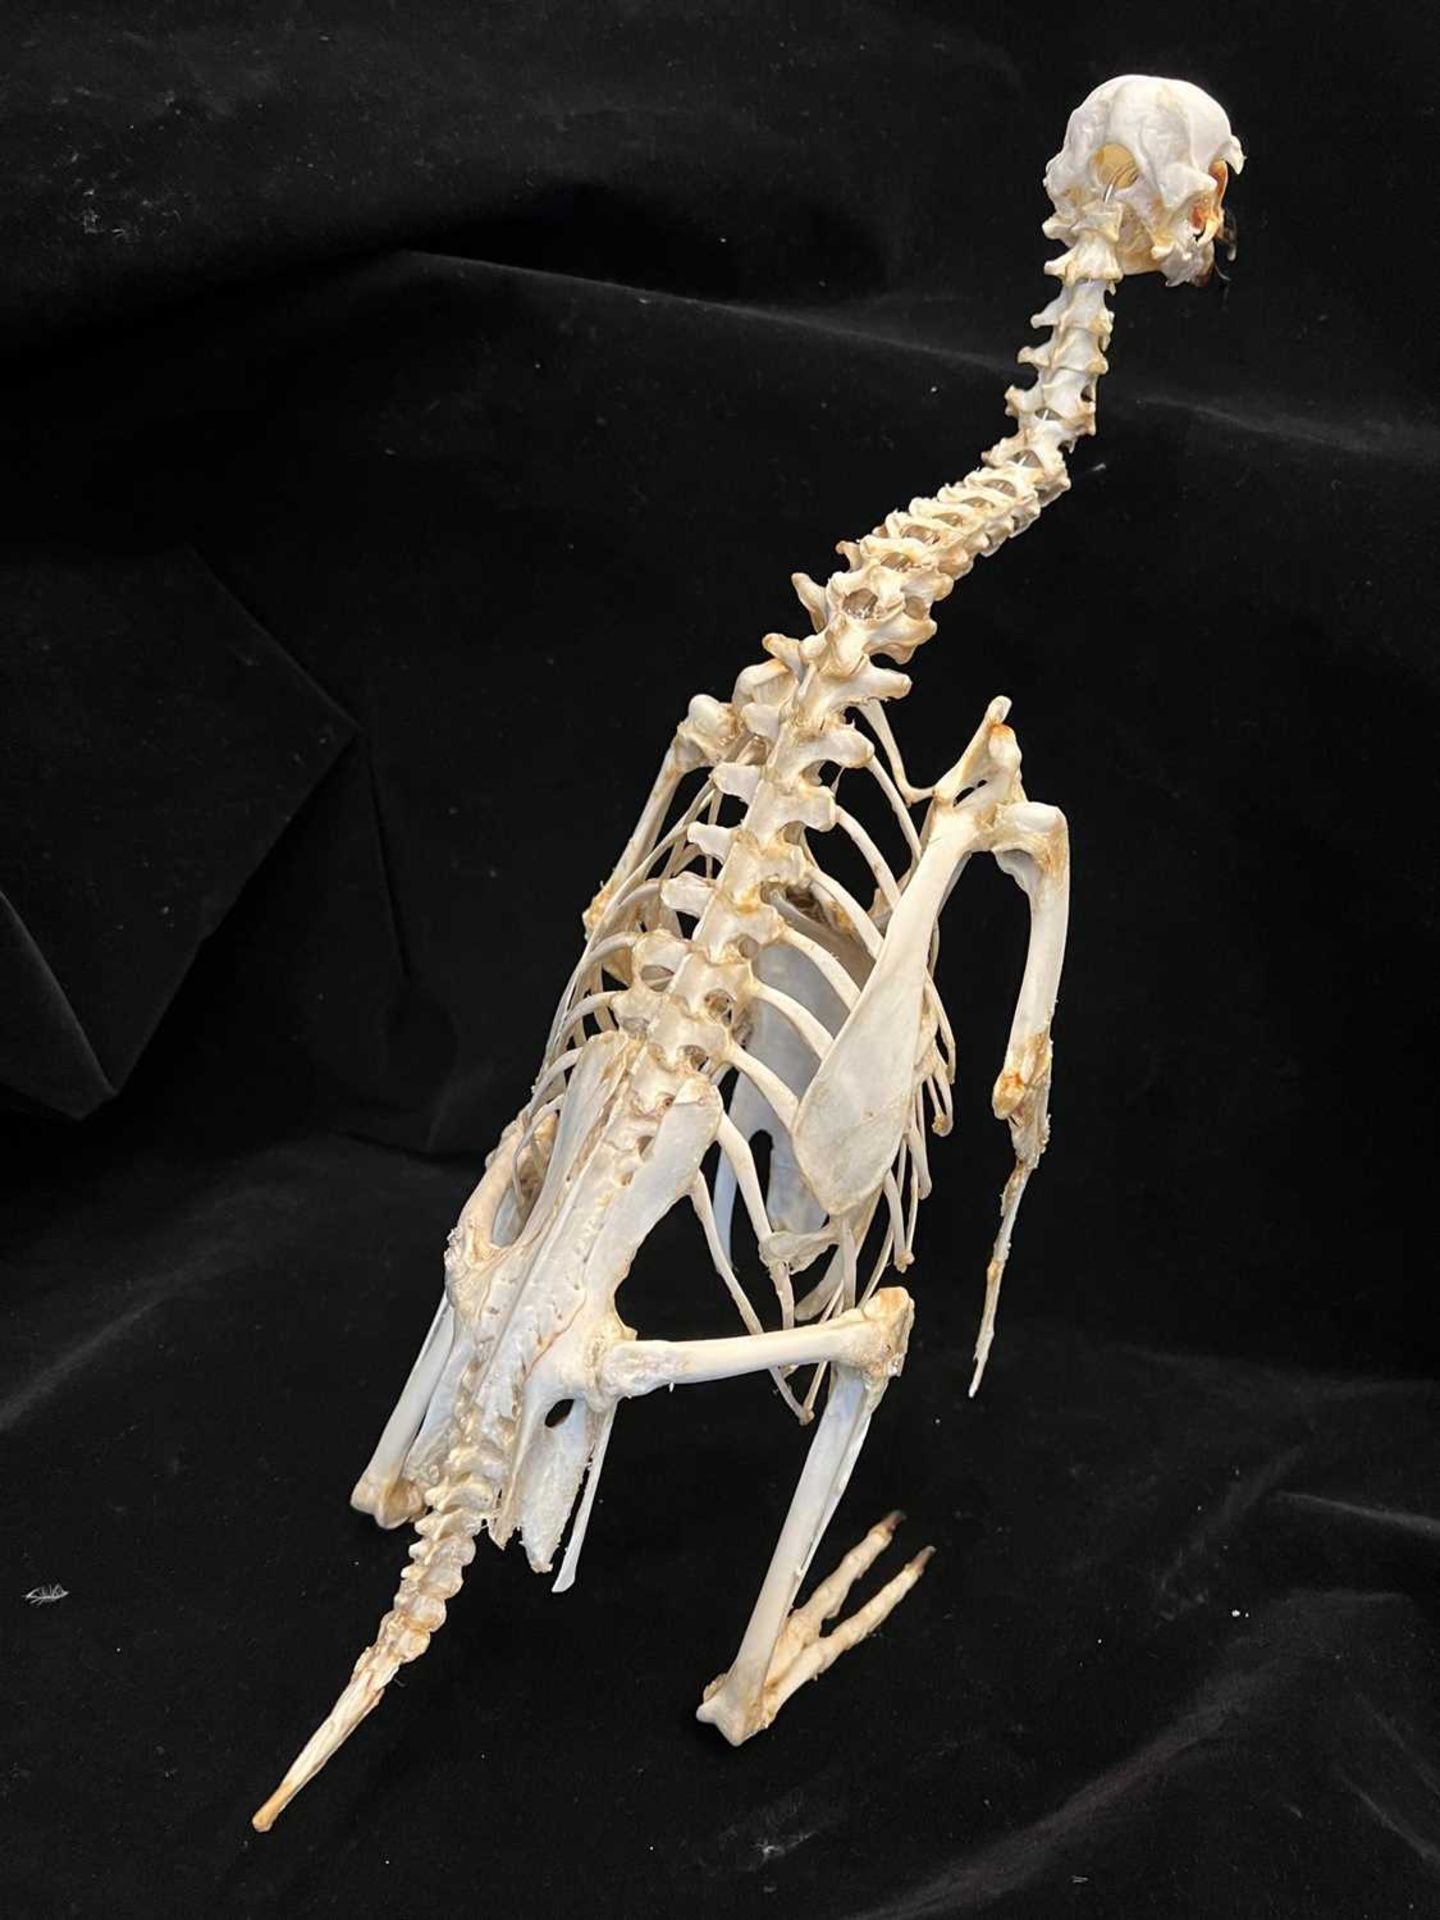 A TAXIDERMY / OSTEOLOGY PENGUIN SKELETON. - Image 7 of 8